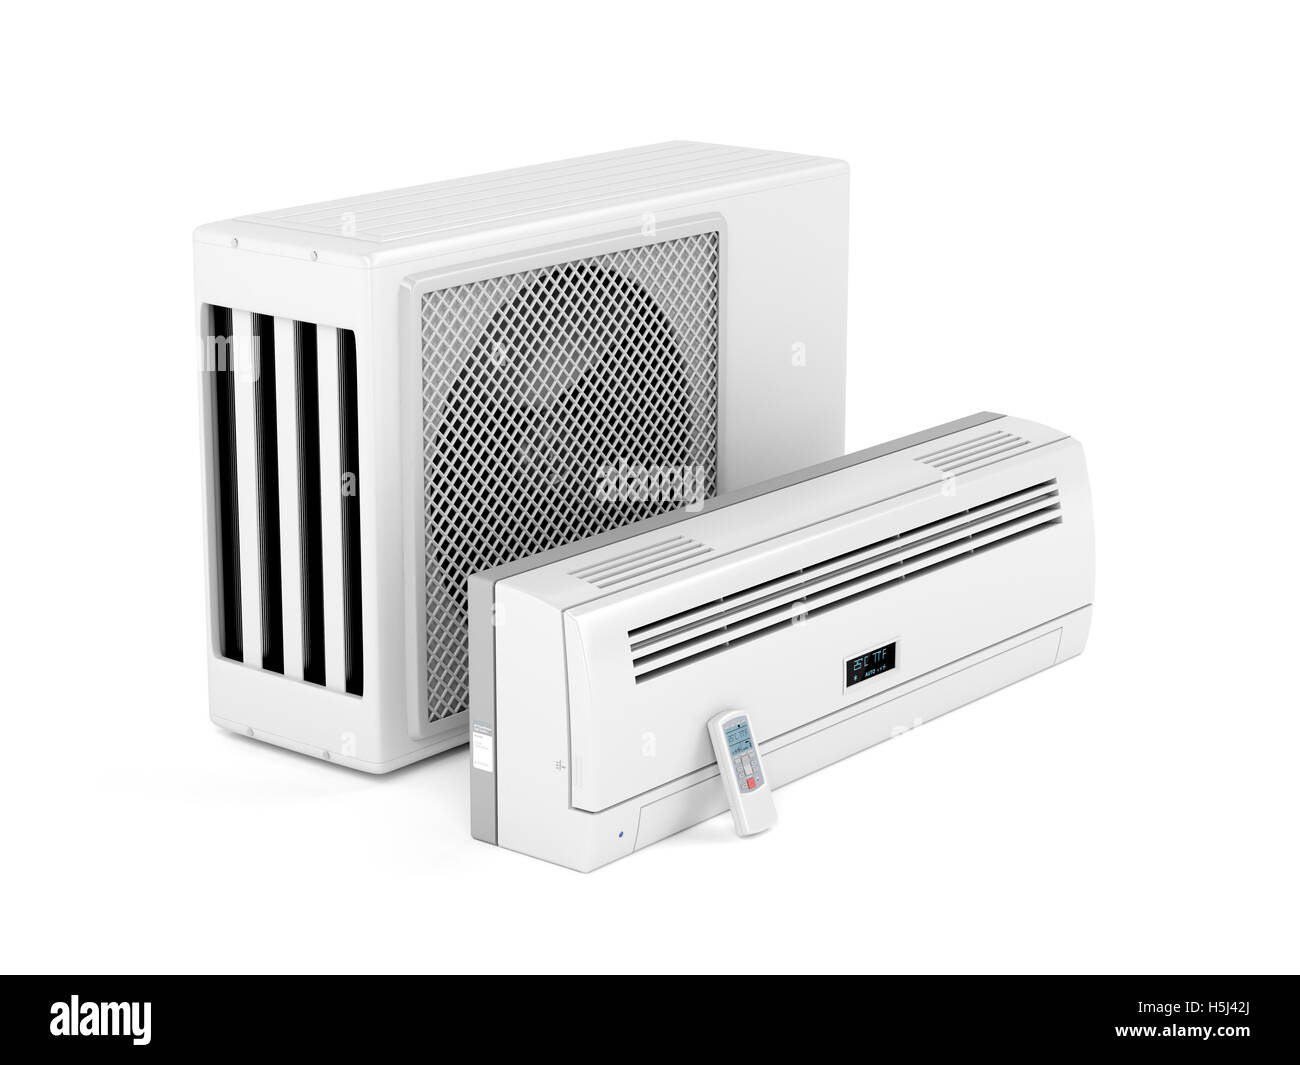 All parts of modern split system air conditioner on white background Stock Photo